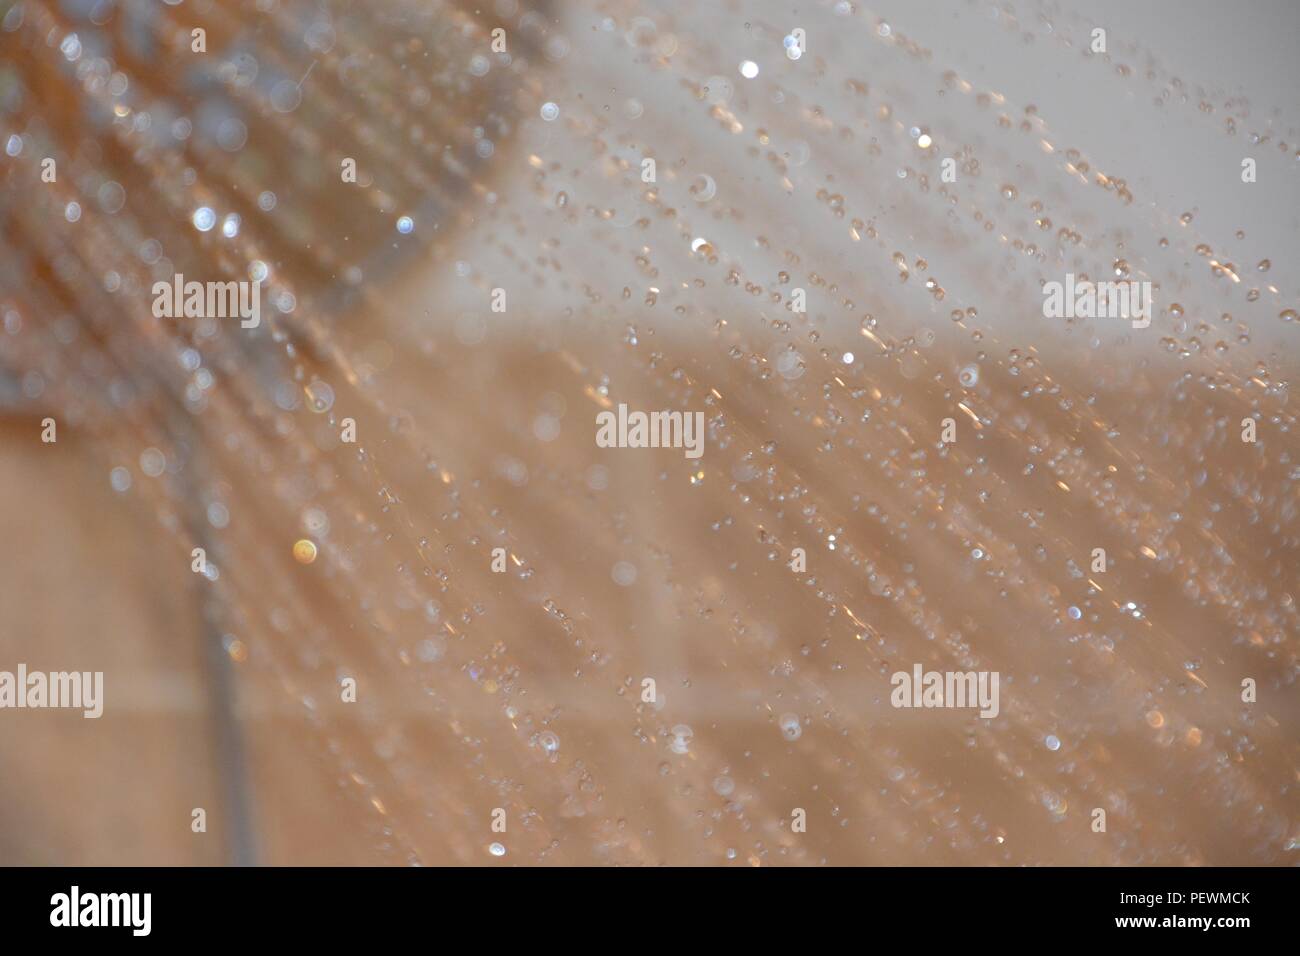 Water cascading from shower head Stock Photo